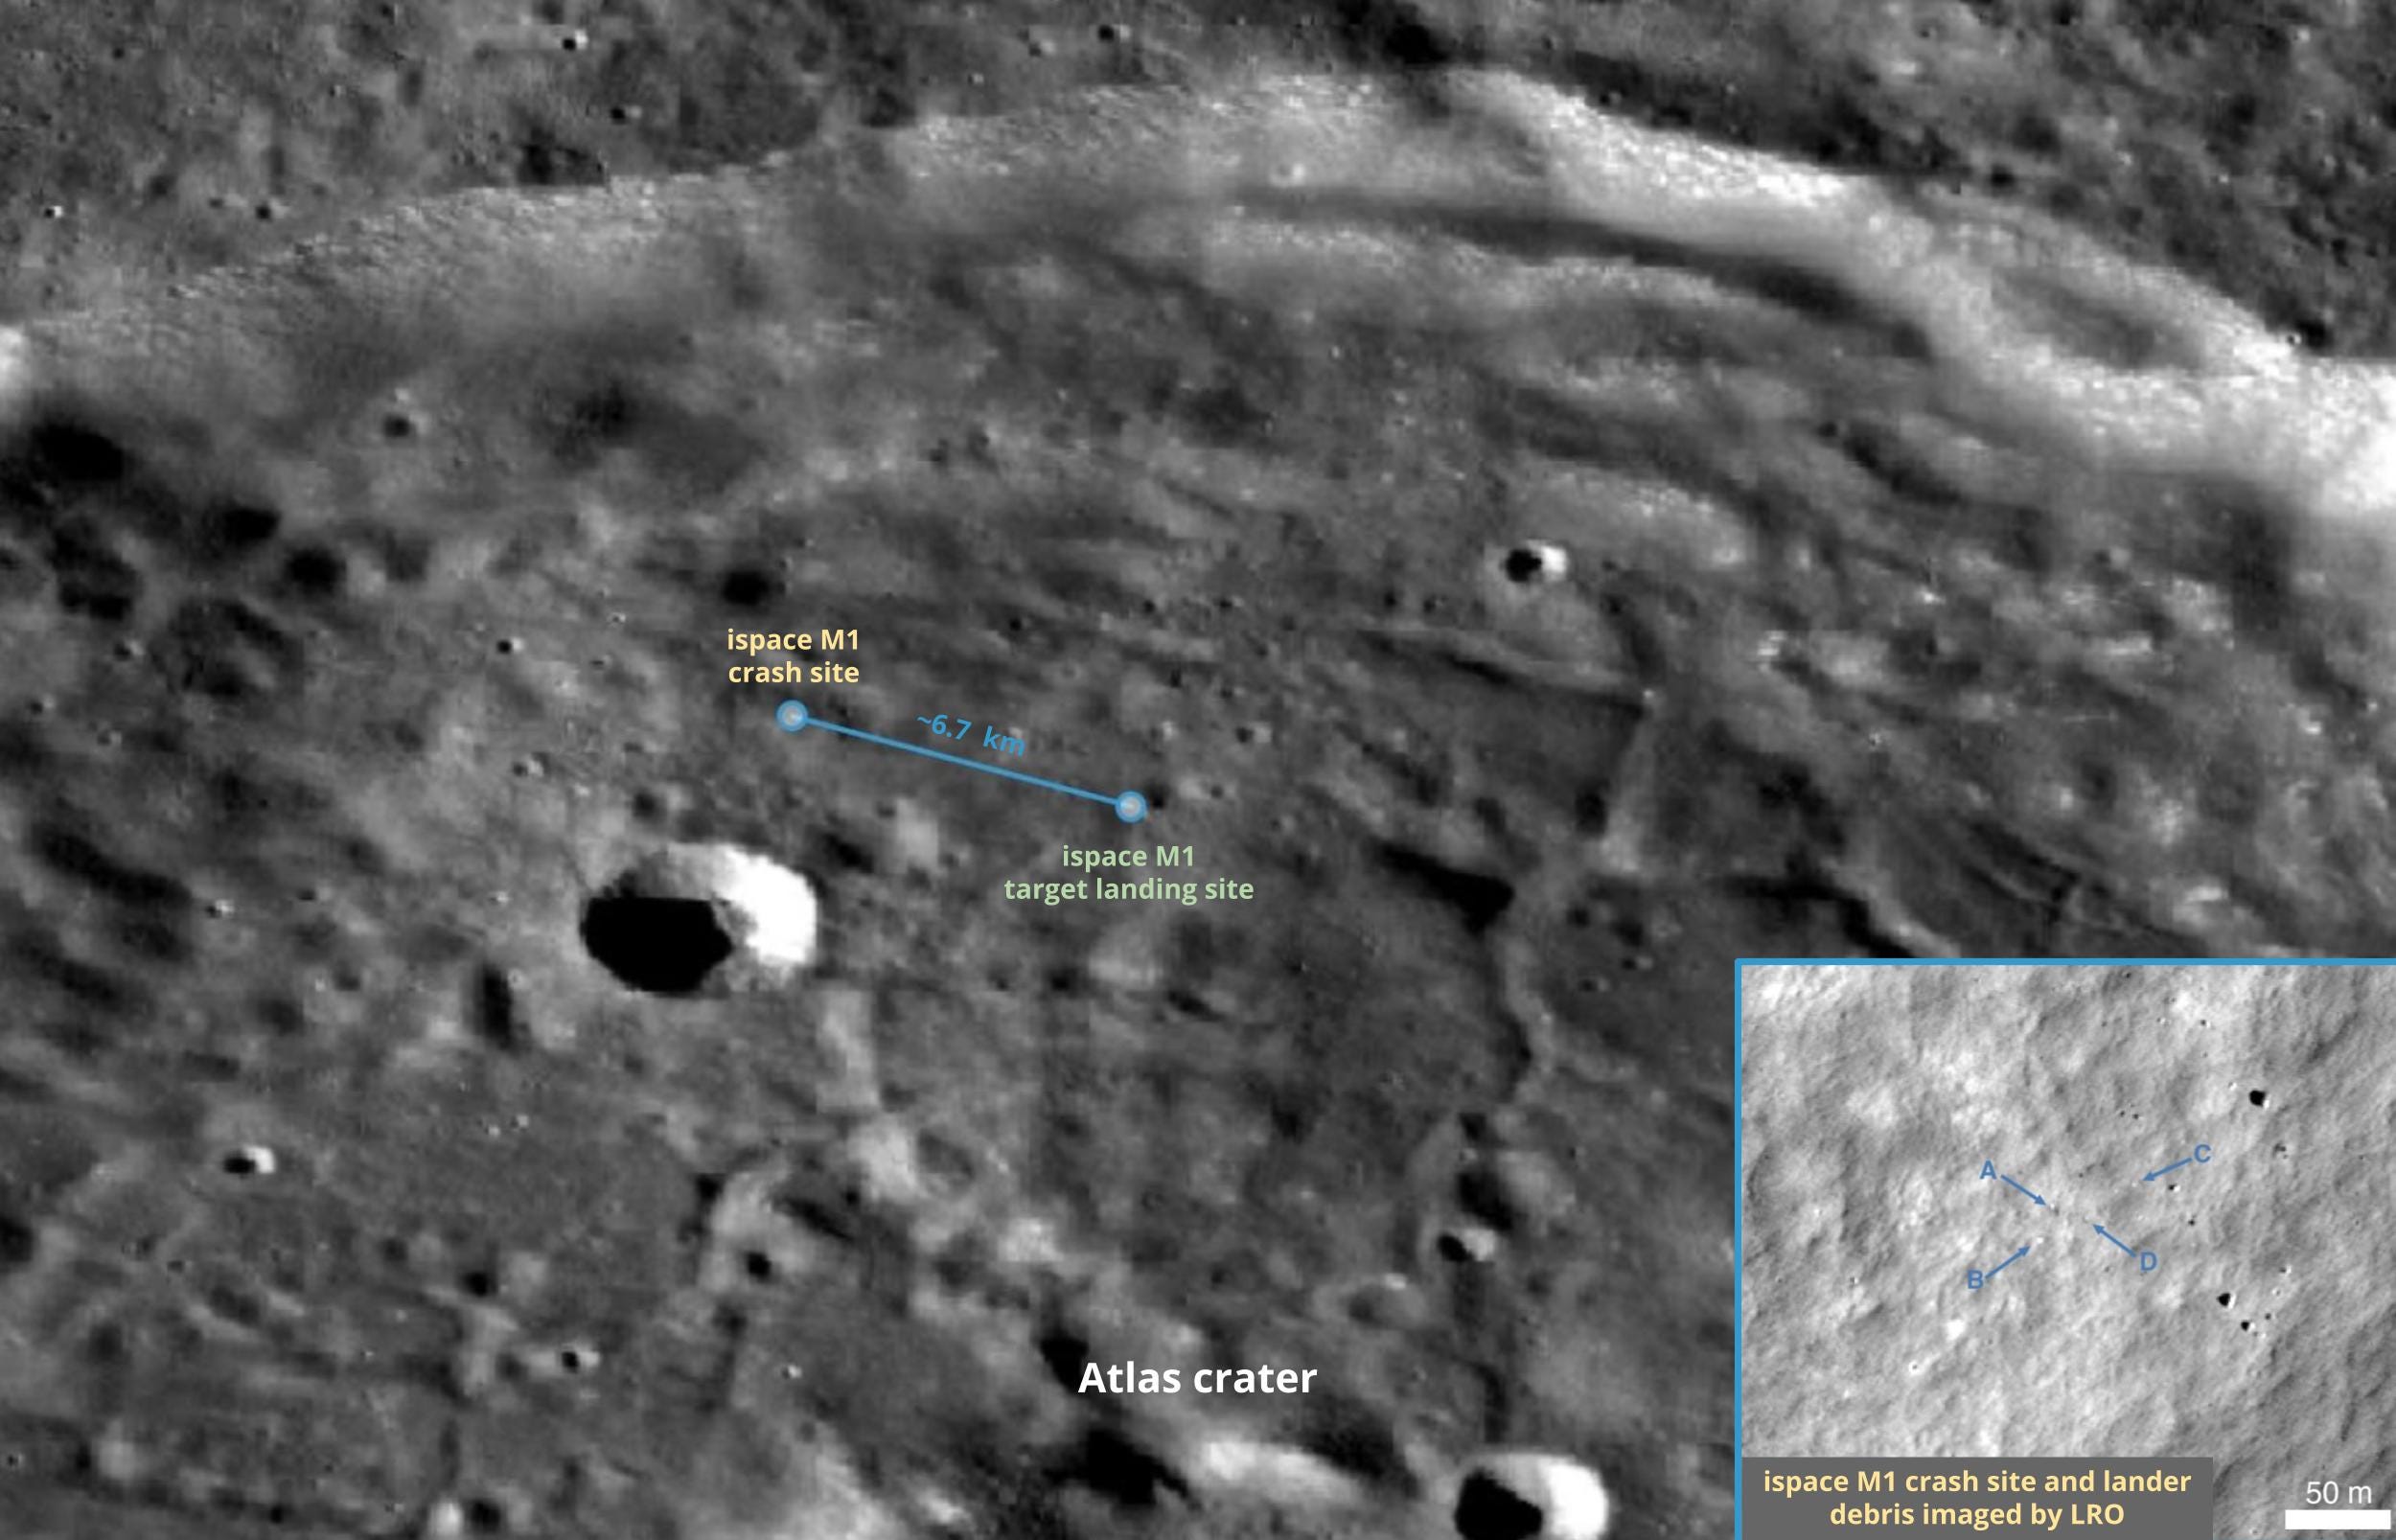 Moon Monday #129: ispace lander’s crash site and cause, mission updates, and more